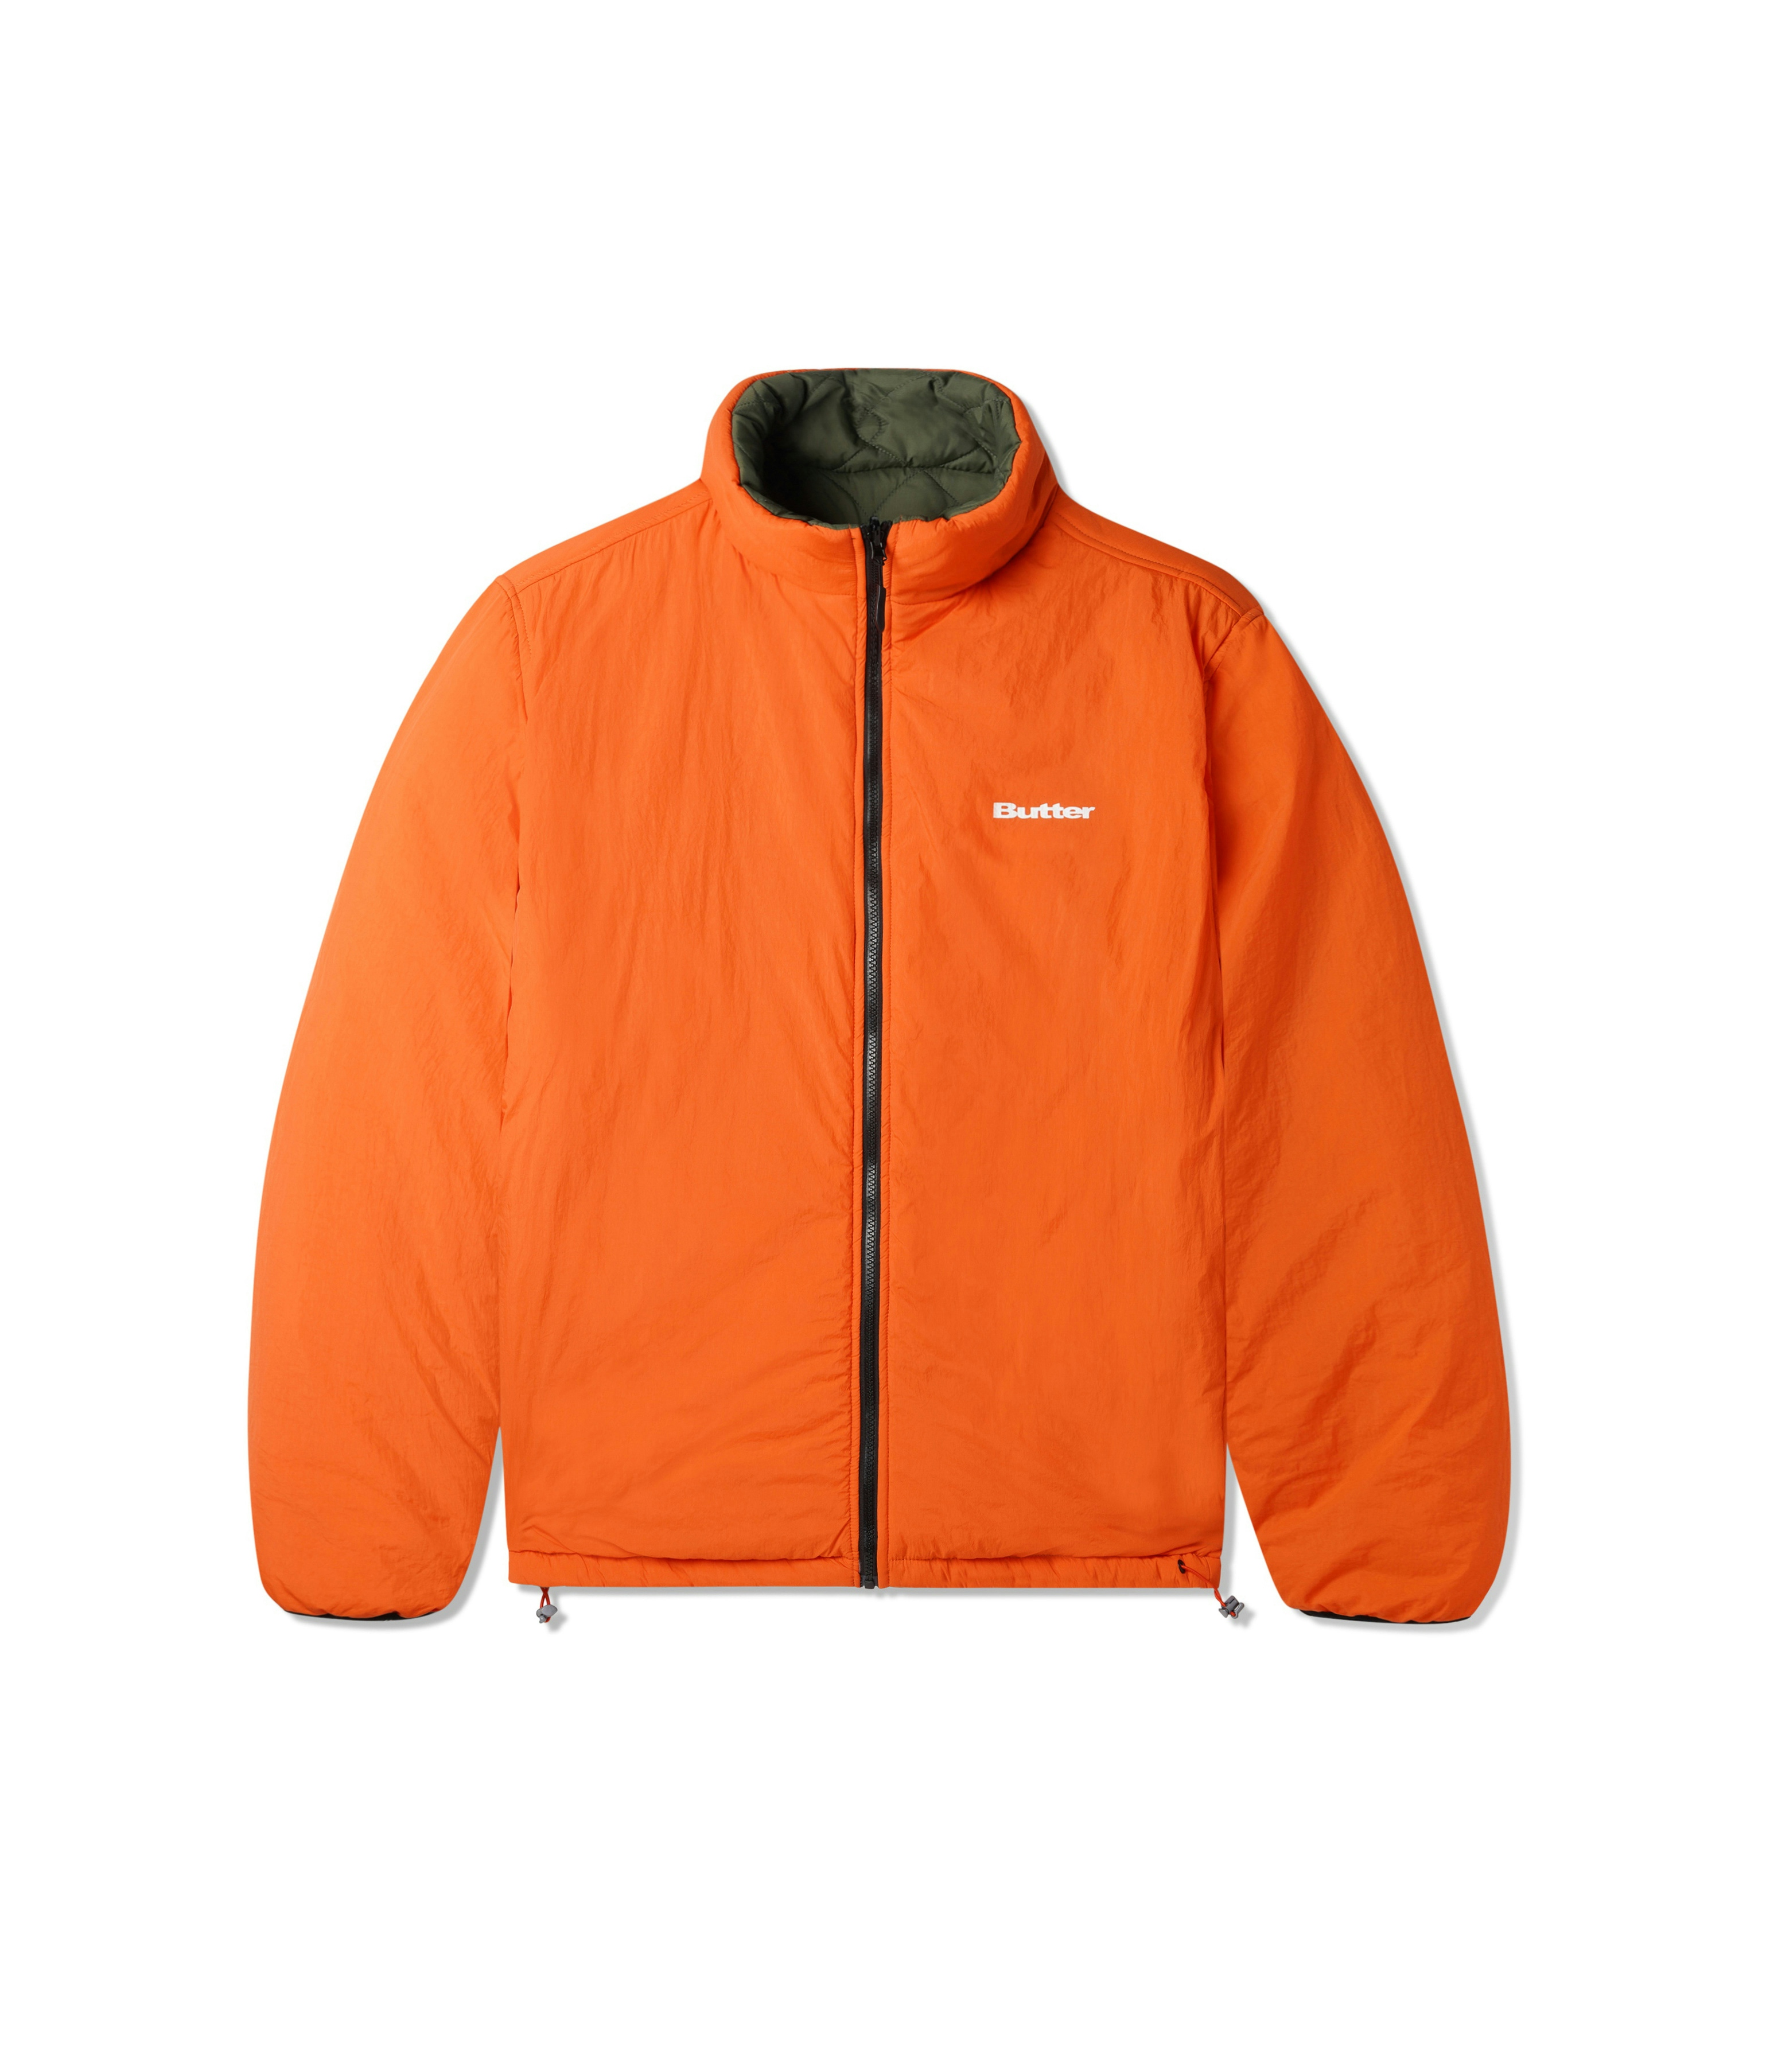 Butter Goods Chainlink Reversible Puffer Jacket Army/Orange 2